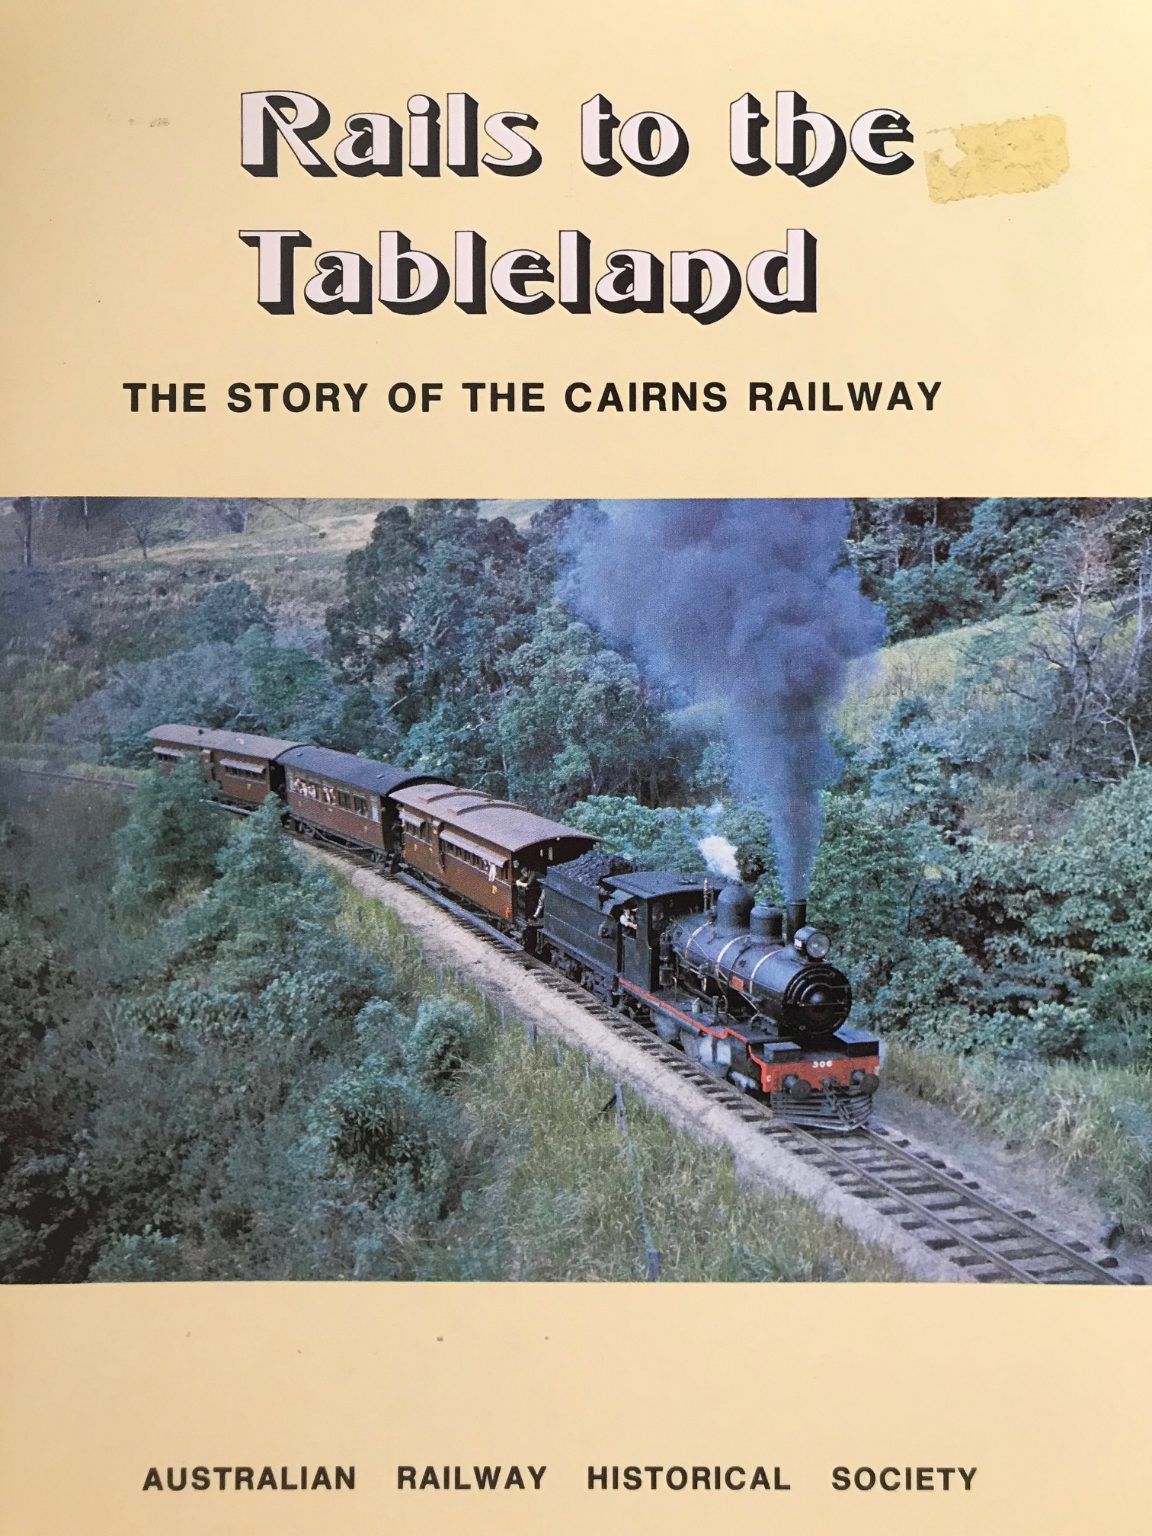 RAILS TO THE TABLELAND: The Story of the Cairns Railway